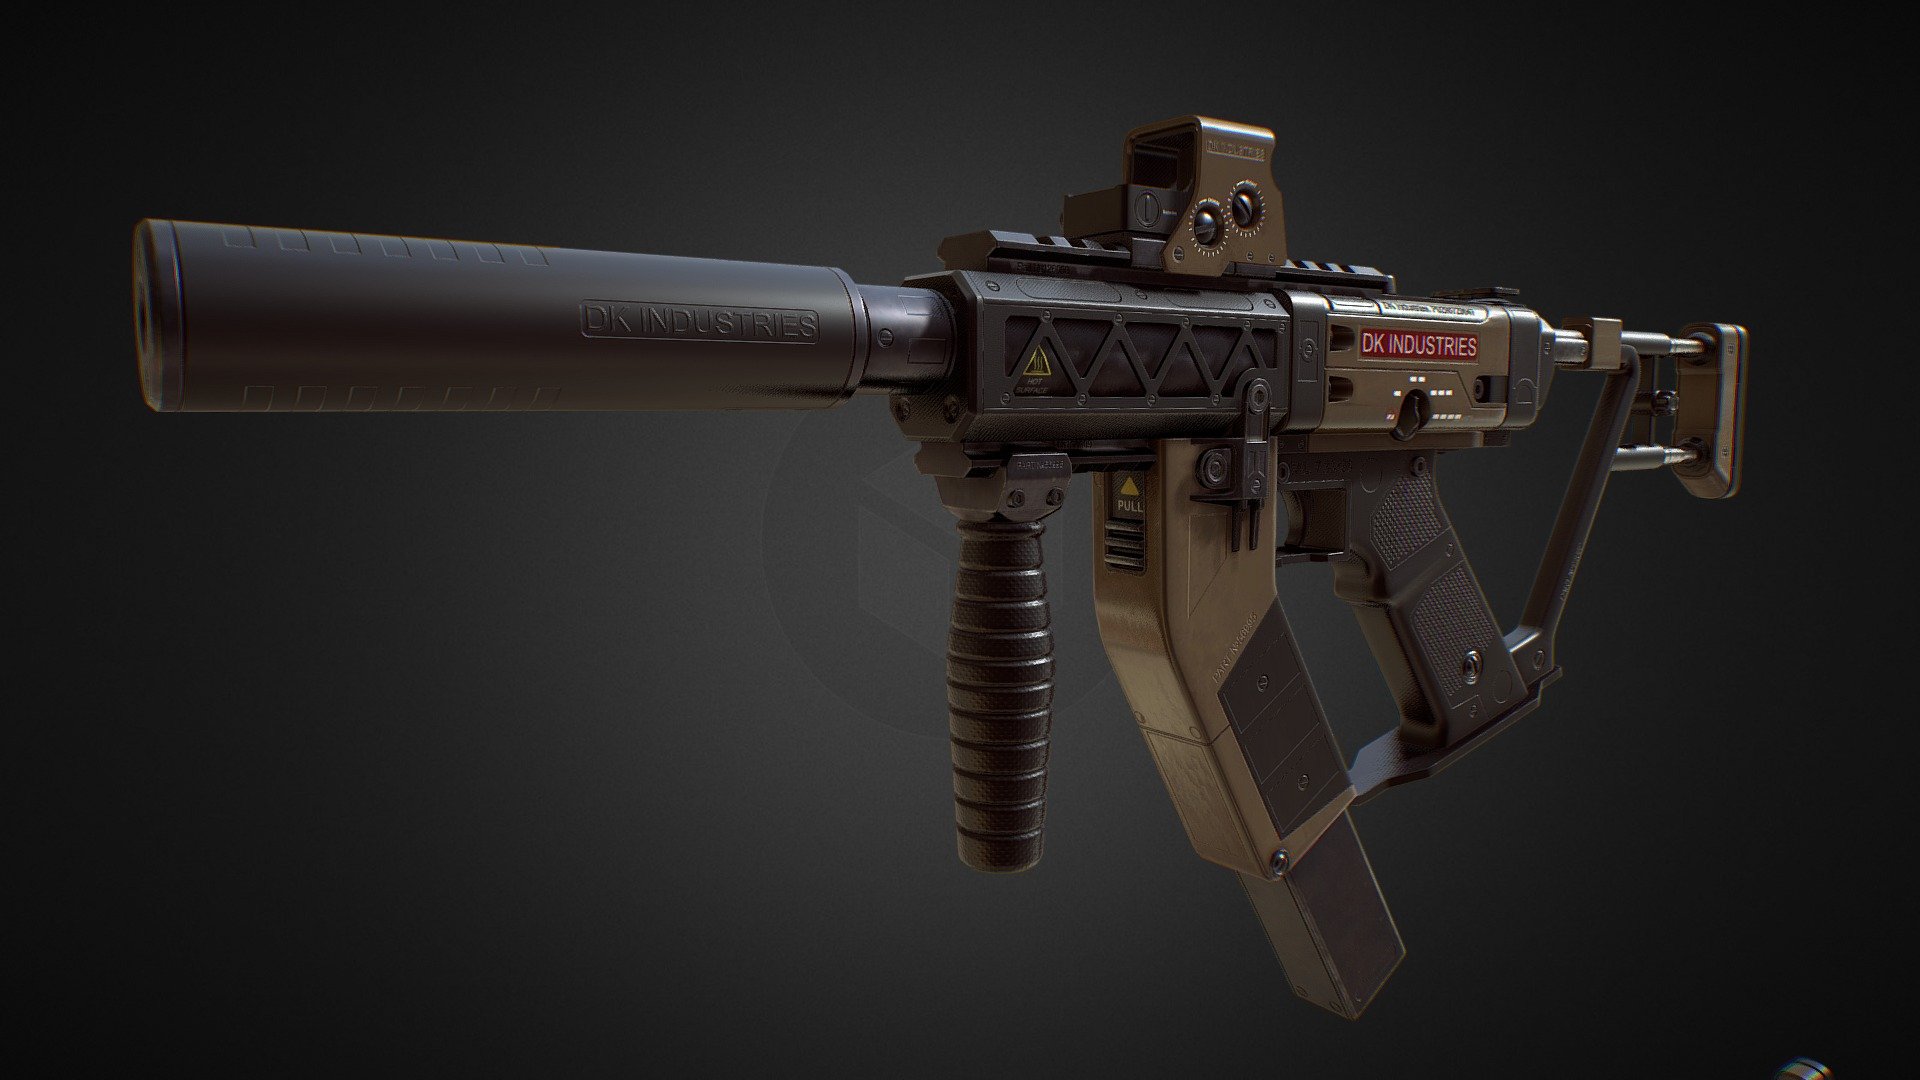 PBR Modular Submachine gun from Sci-Fi weapon pack on unity assetstore (PBR SciFi Weapons v1)  with movable parts and hires textures - PBR Assault gun (from Sci-Fi weapon pack) - 3D model by Dmitrii_Kutsenko (@Dmitrii_Kutcenko) 3d model